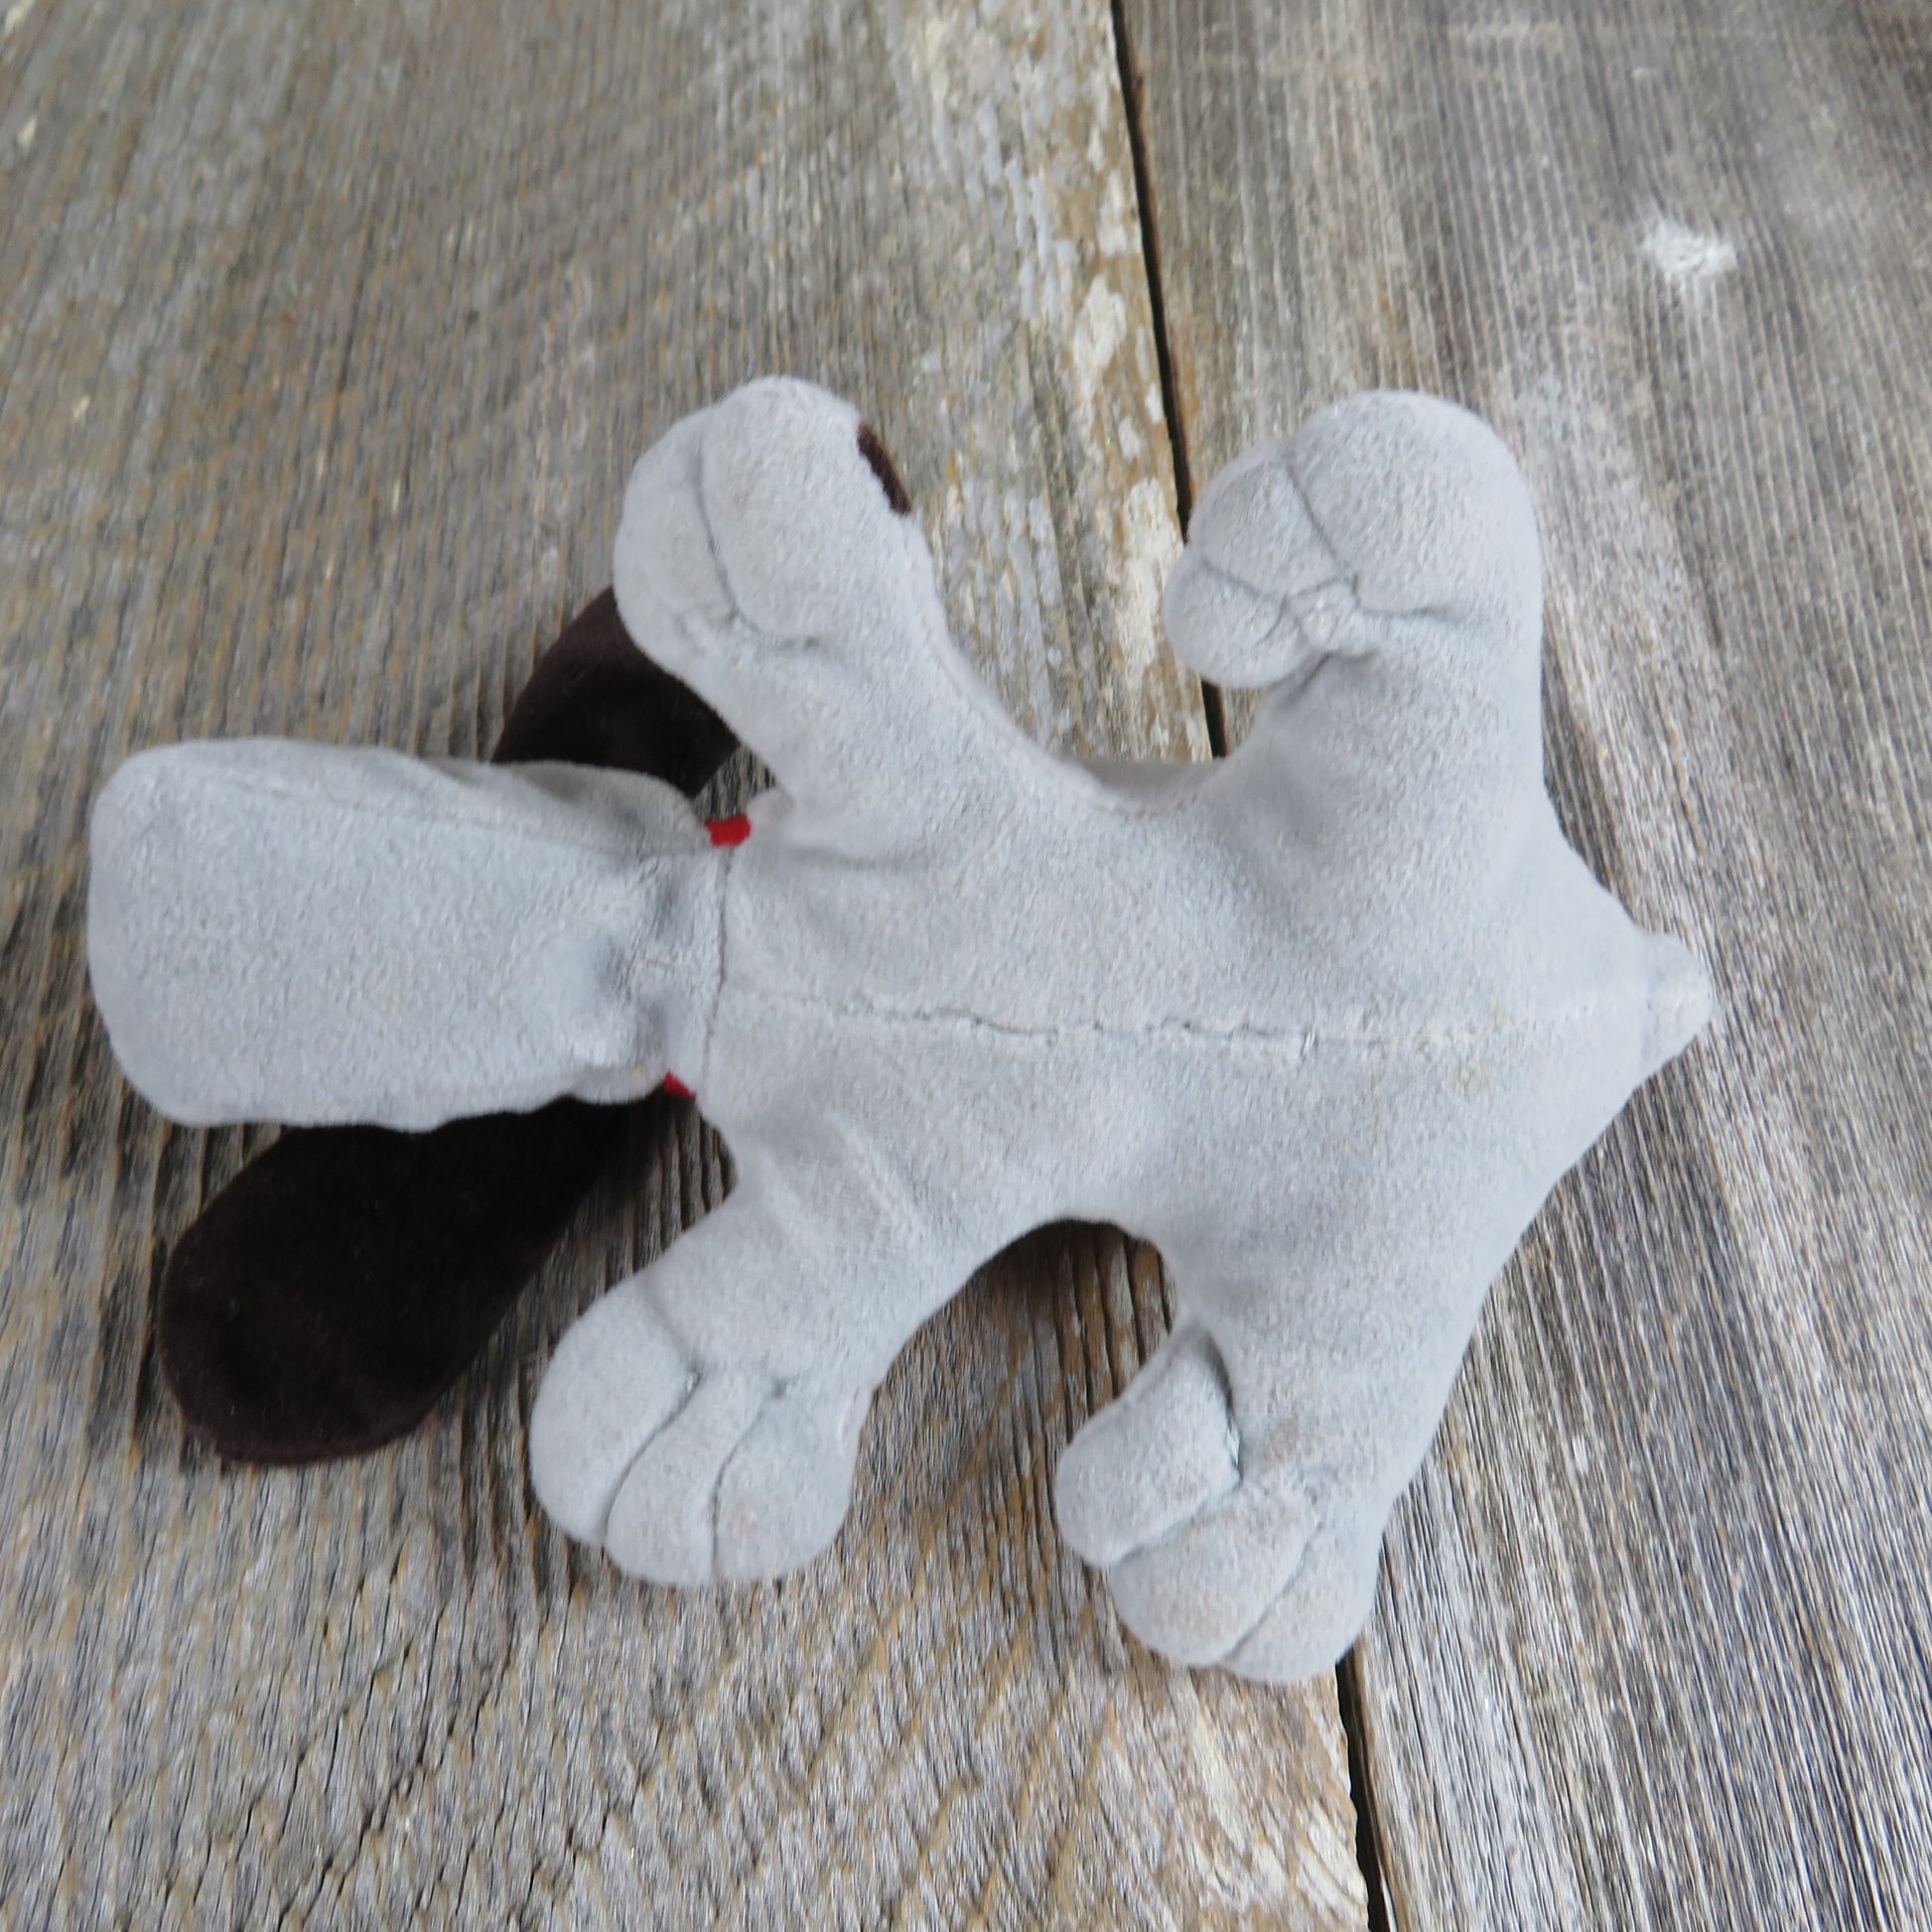 Vintage Spotted Pound Puppy Plush Grey Brown Long Ears Gray Stuffed Animal Mini Small - At Grandma's Table